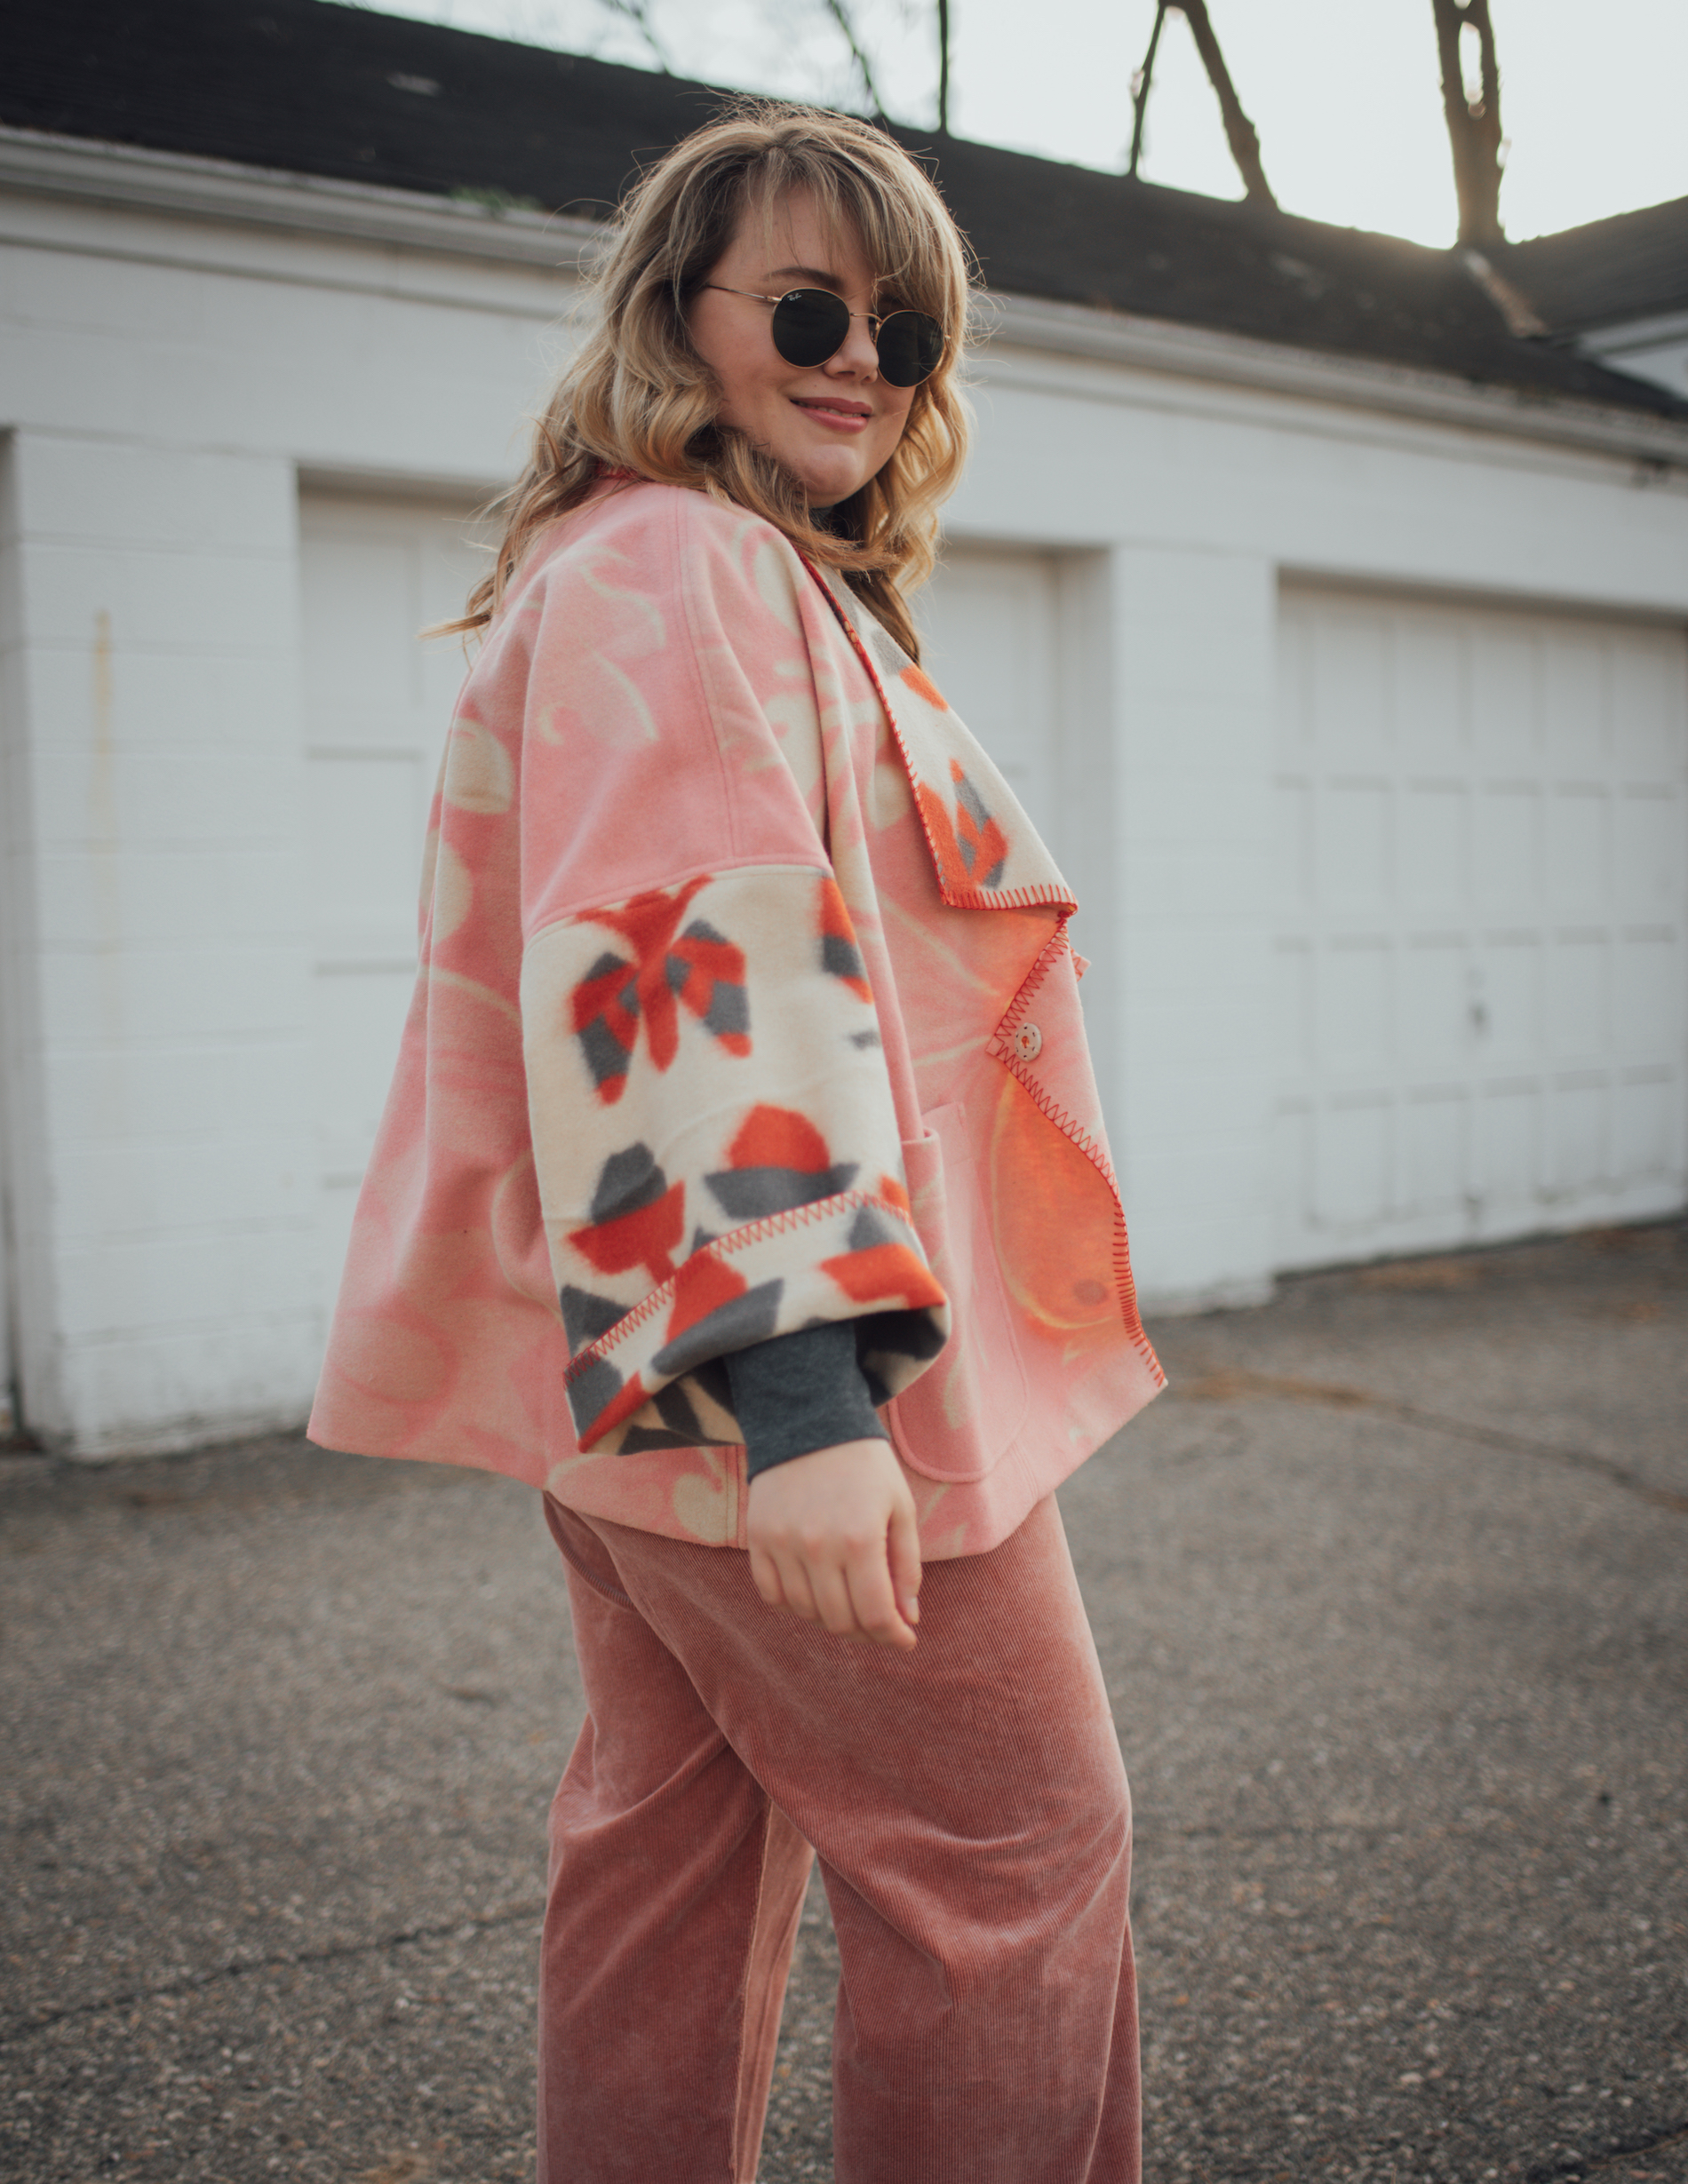 Winter Outfits But Make It Pink. Sharing a pink look from Anthropologie Plus, this winter outfit makes a statement! 